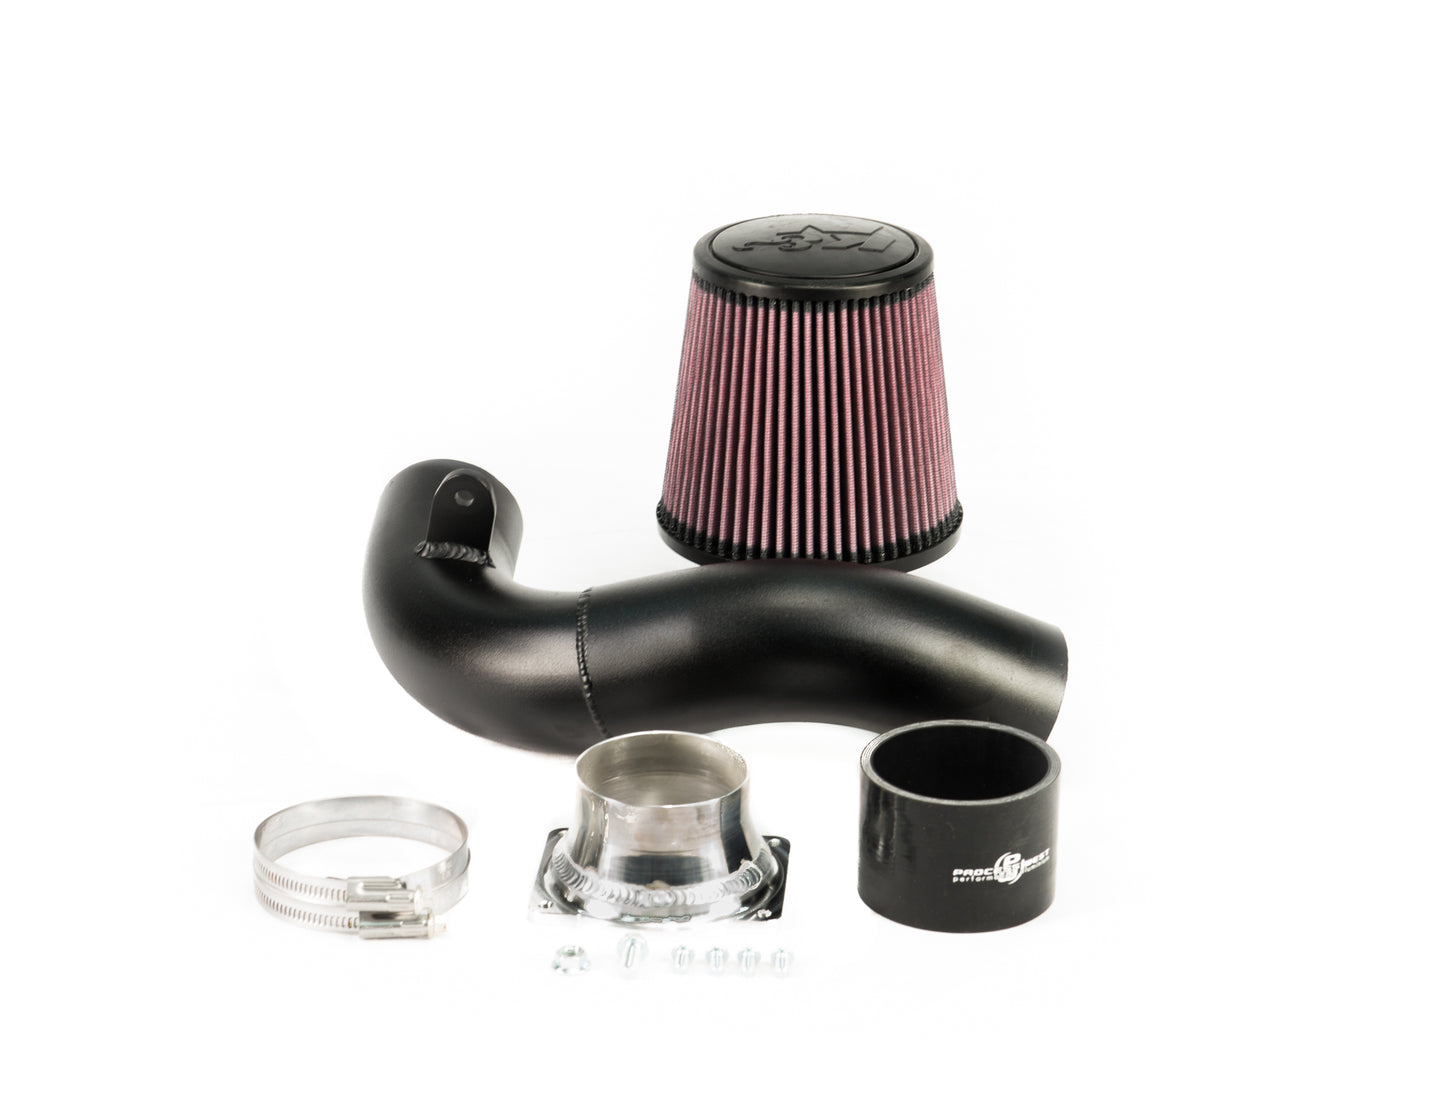 Process West - Cold Air Intake (CAI) - (Forester SF GT 97-00)